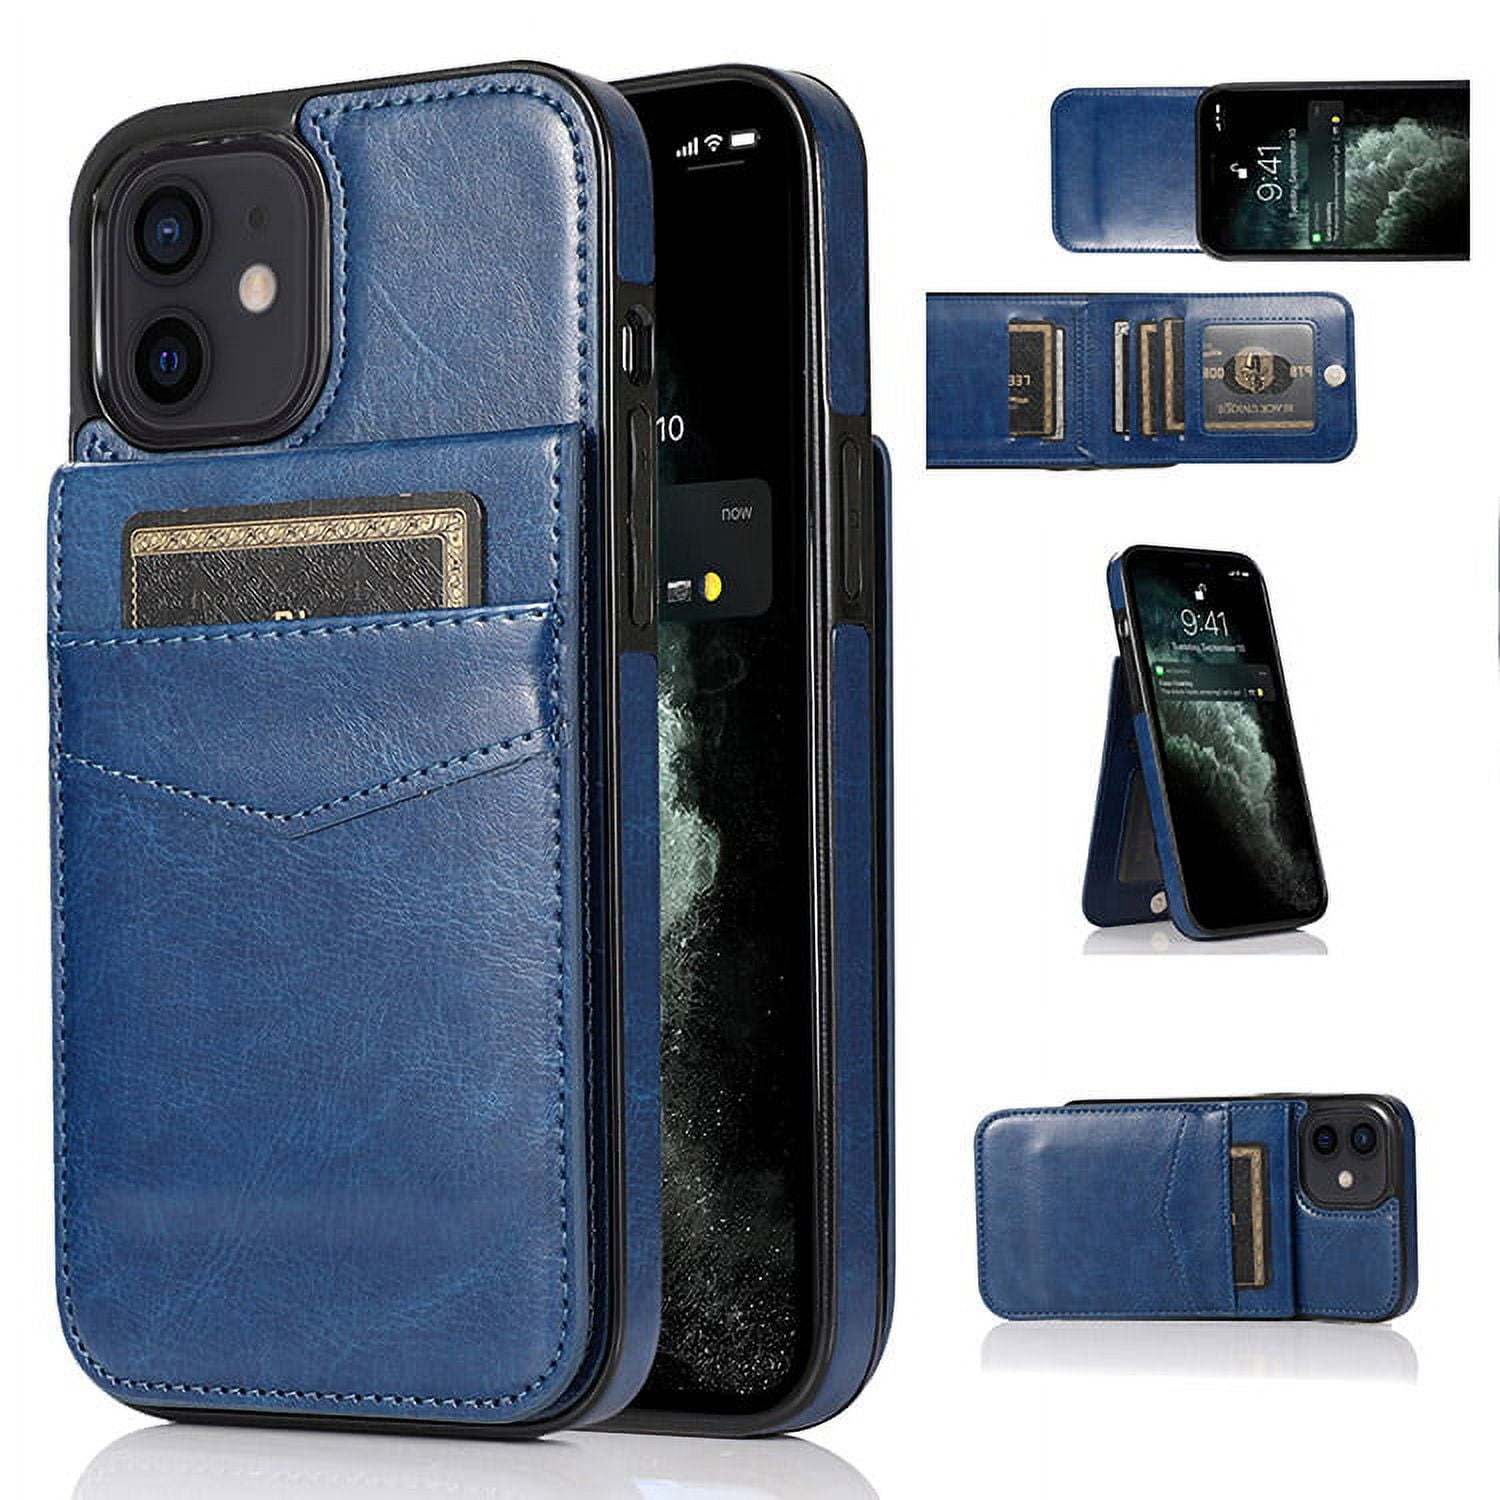 Luxury Designer iPhone 13 Wallet Cases  グッチ, ルイヴィトン, ヴィトン